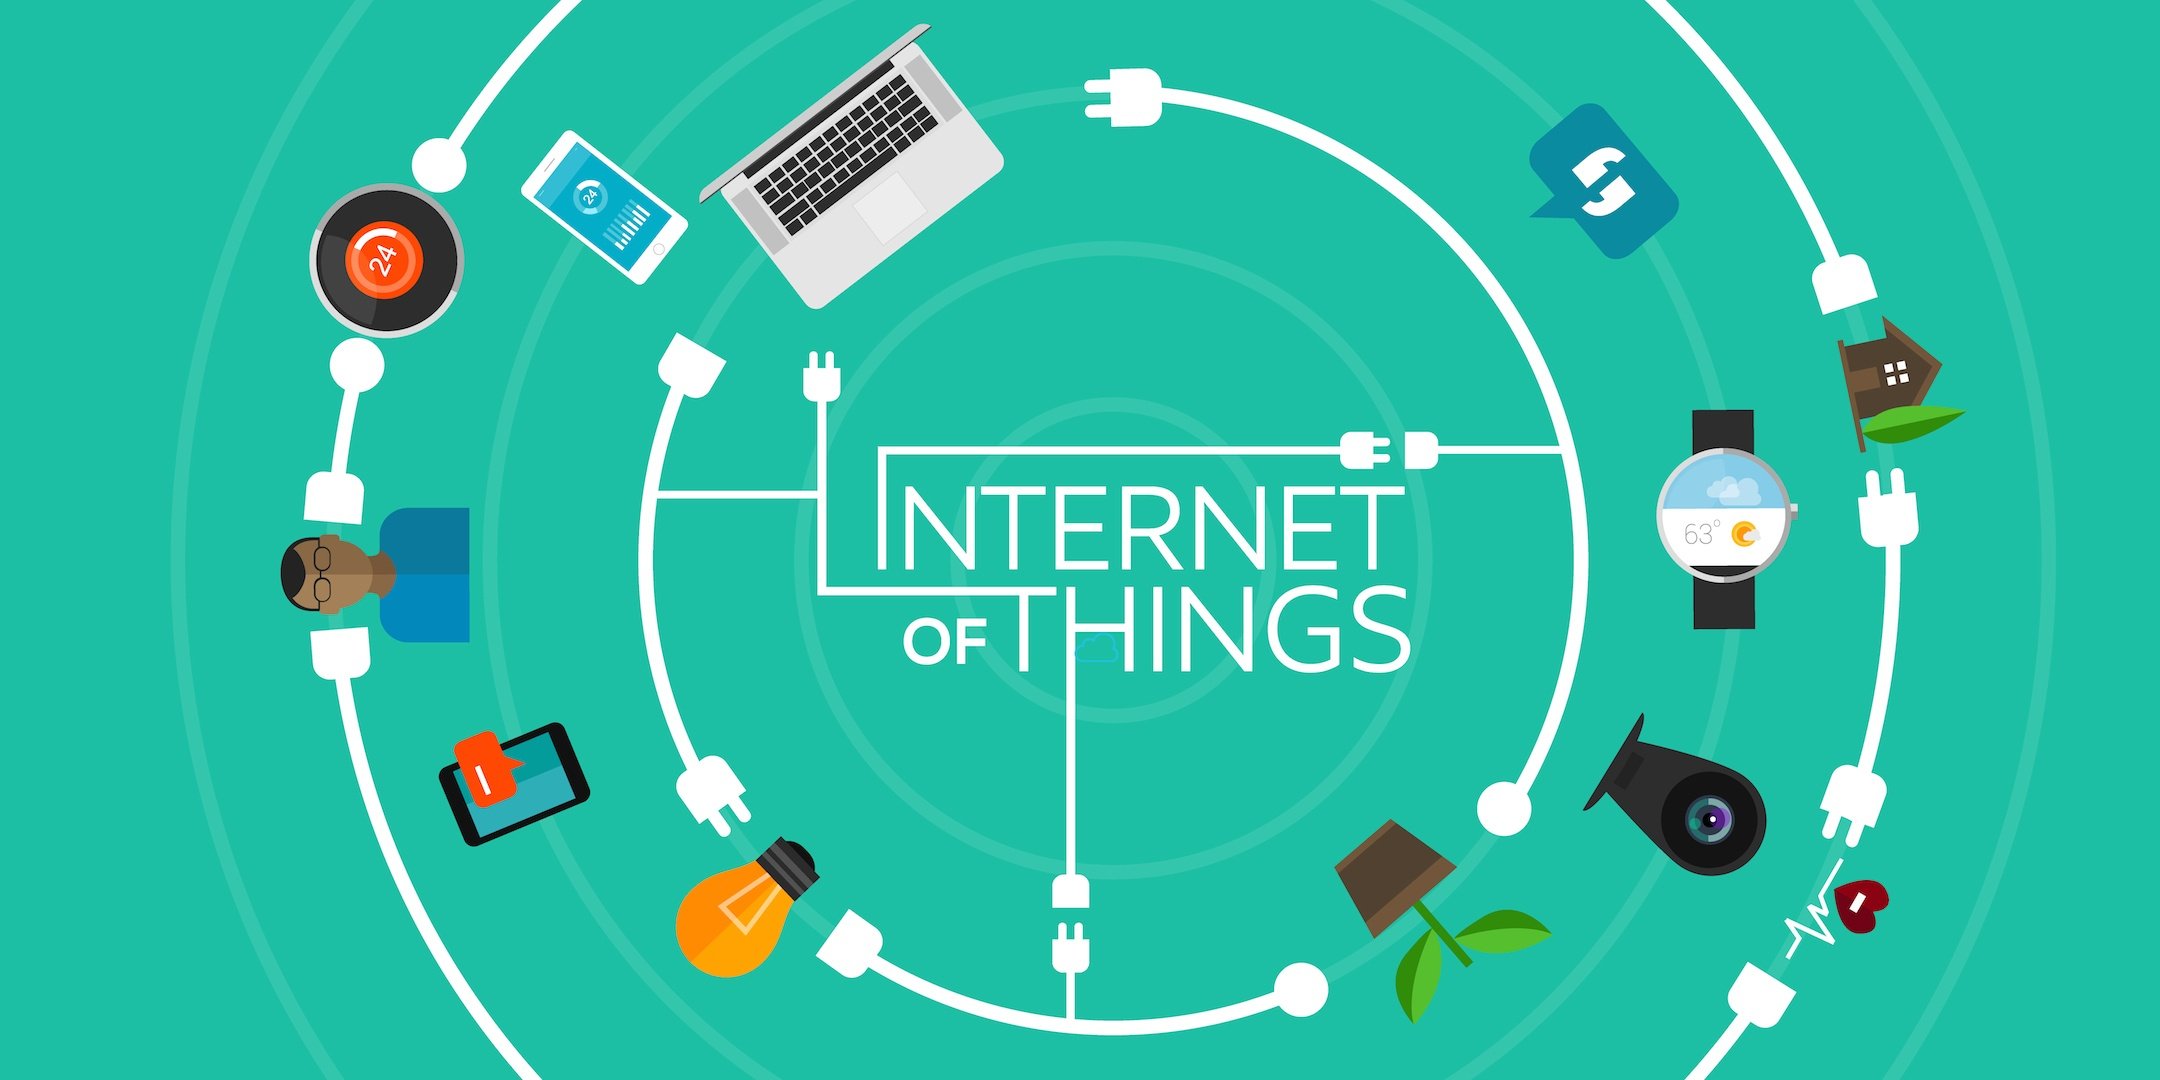 12 IoT Trends: Experts Answering How IoT Will Evolve by 2020